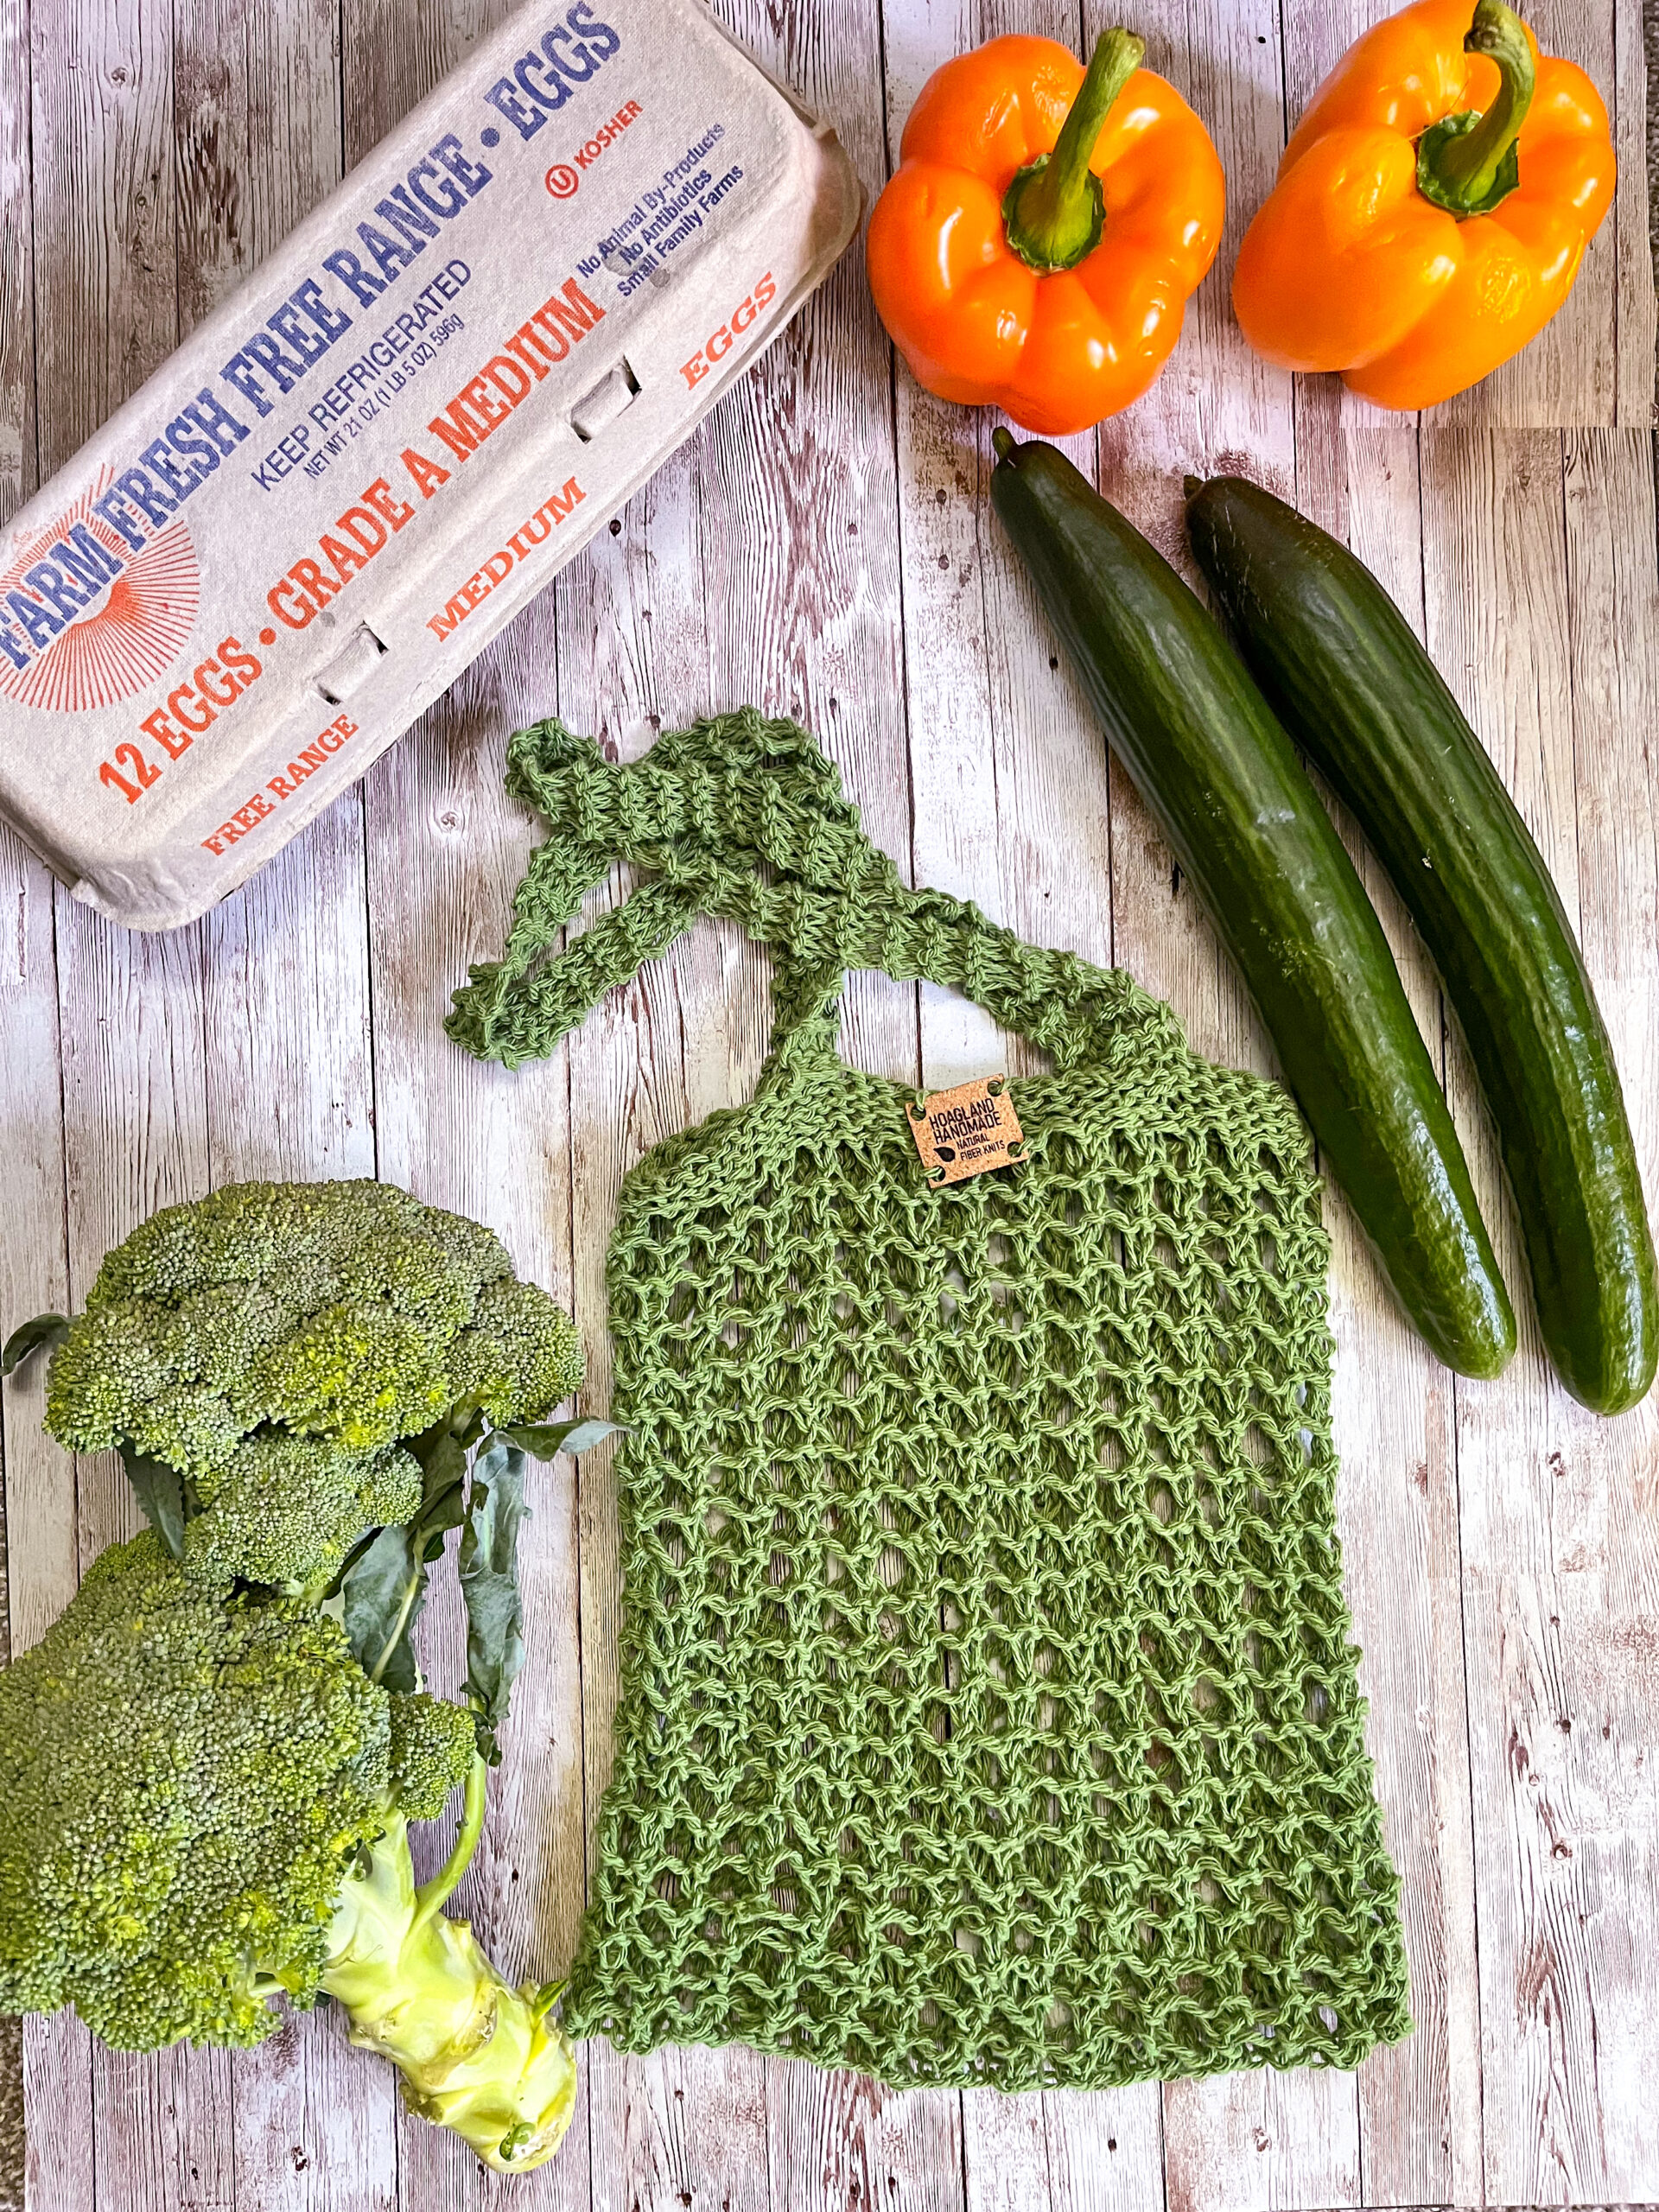 A green recycled cotton mesh tote bag is surrounded by a carton of farm eggs, orange bell peppers, cucumbers, and broccoli